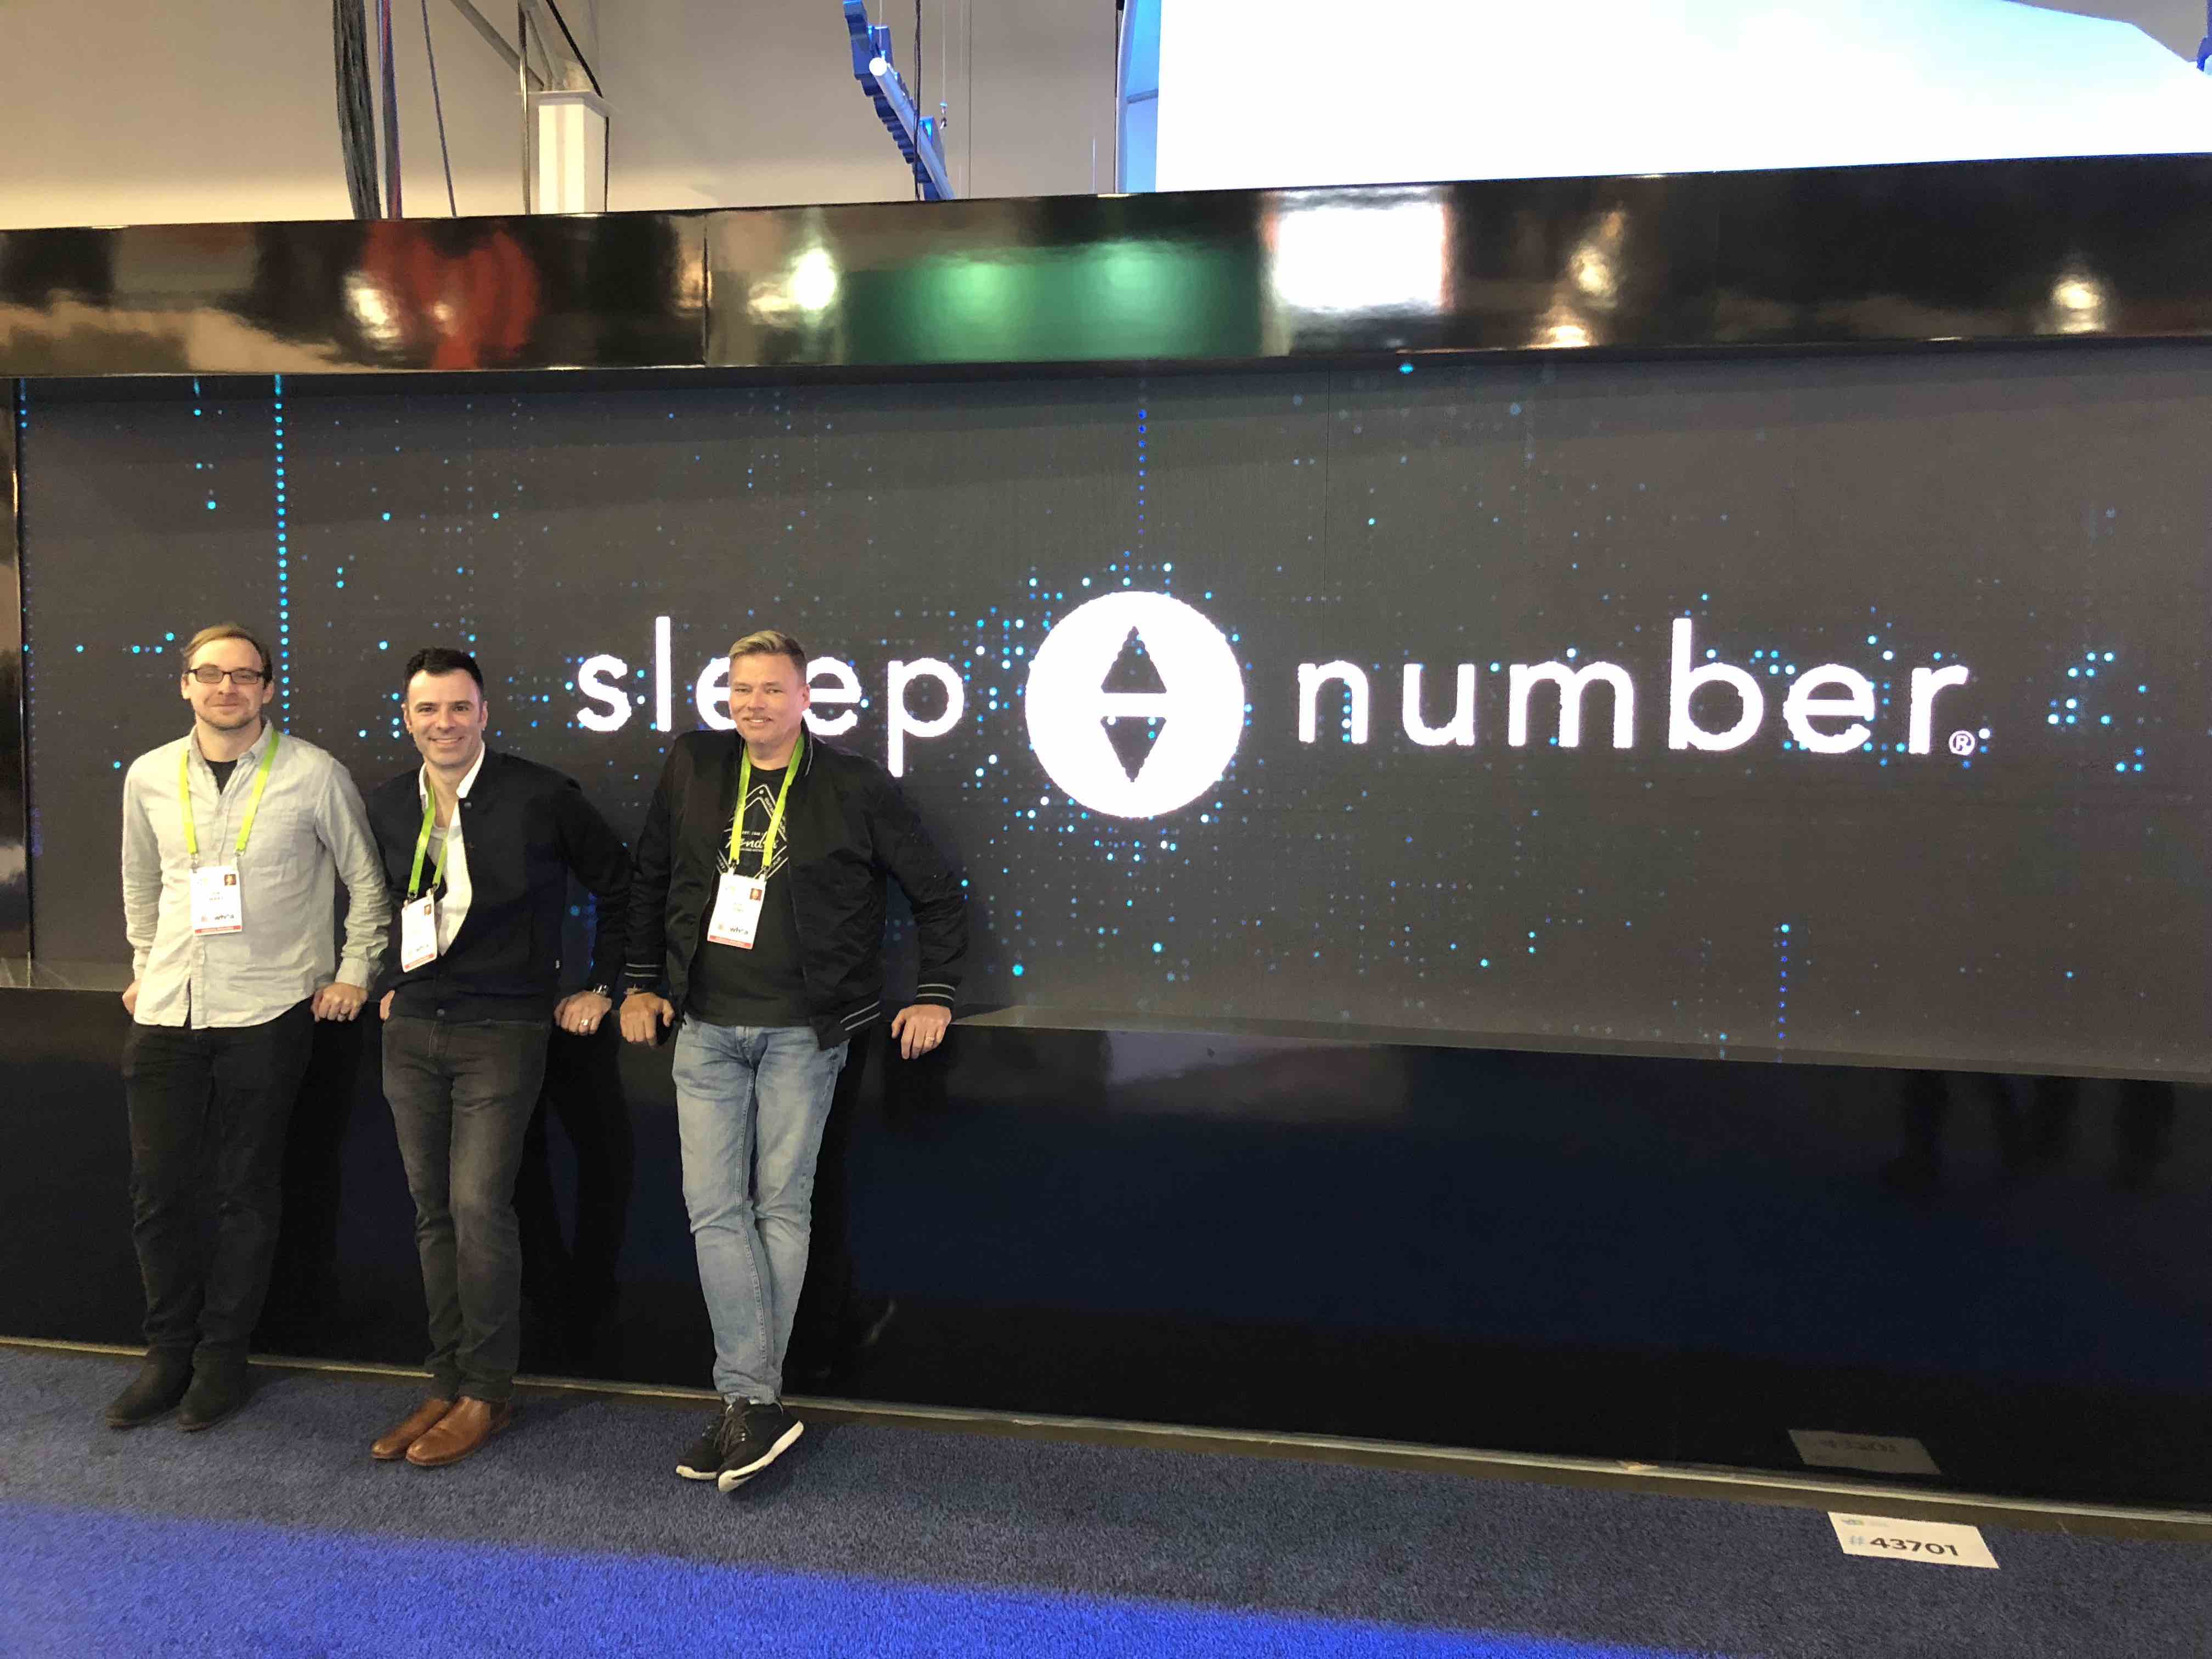 Three men standing in front of a digital screen reading "Sleep Number" at CES trade show